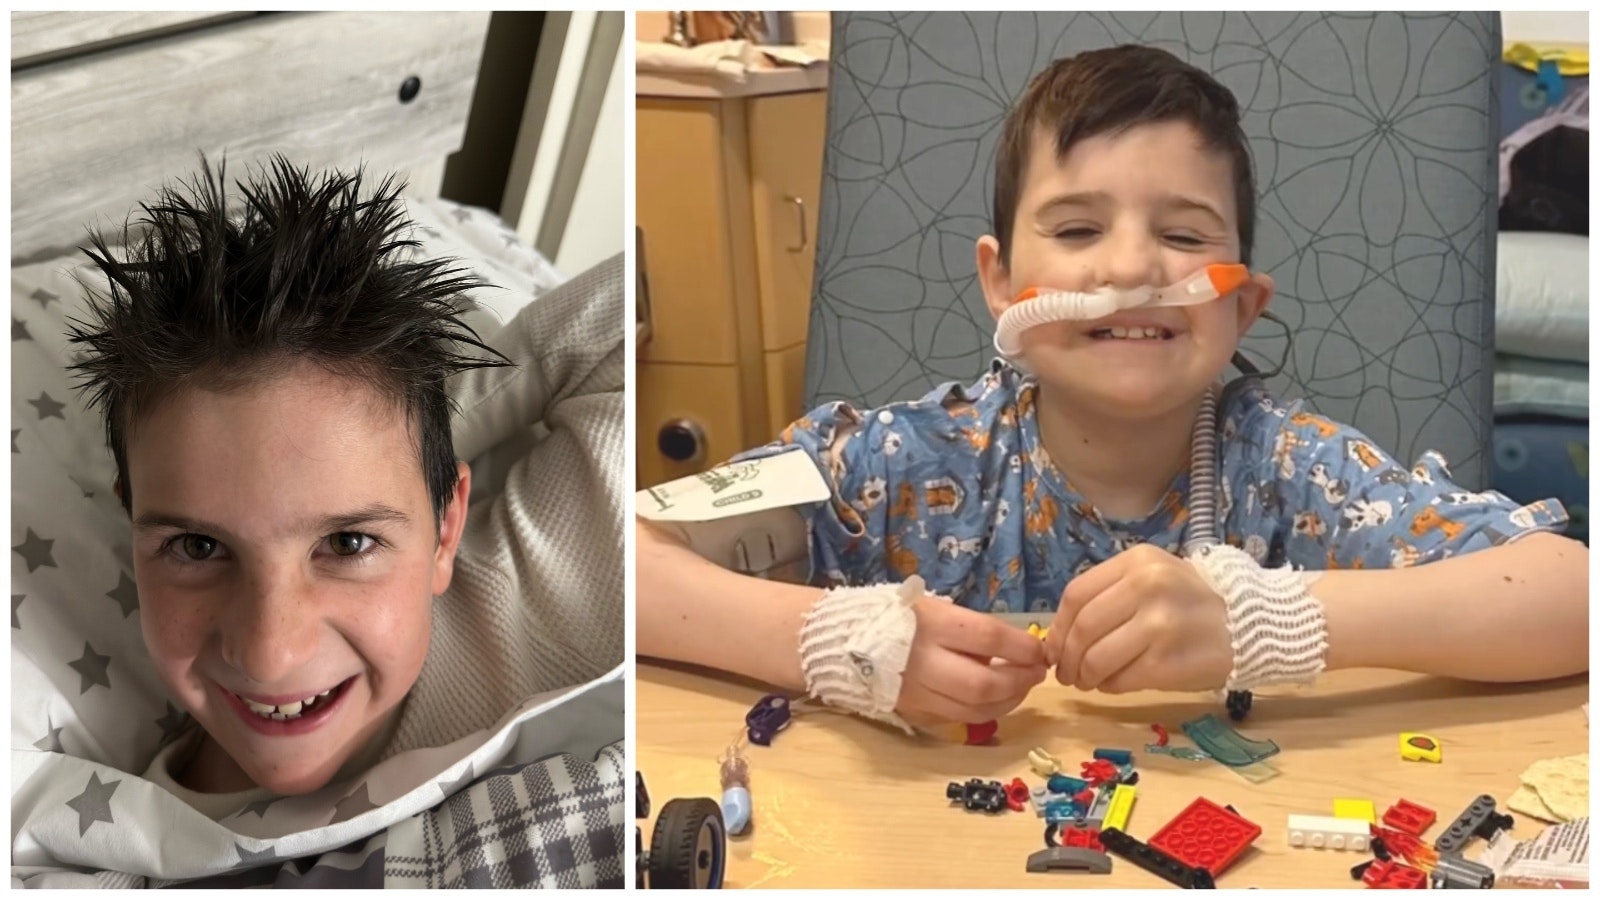 Spending so much time in a hospital room is difficult for Wyatt Morgan, who like most 8-year-olds, wants to get out and play.